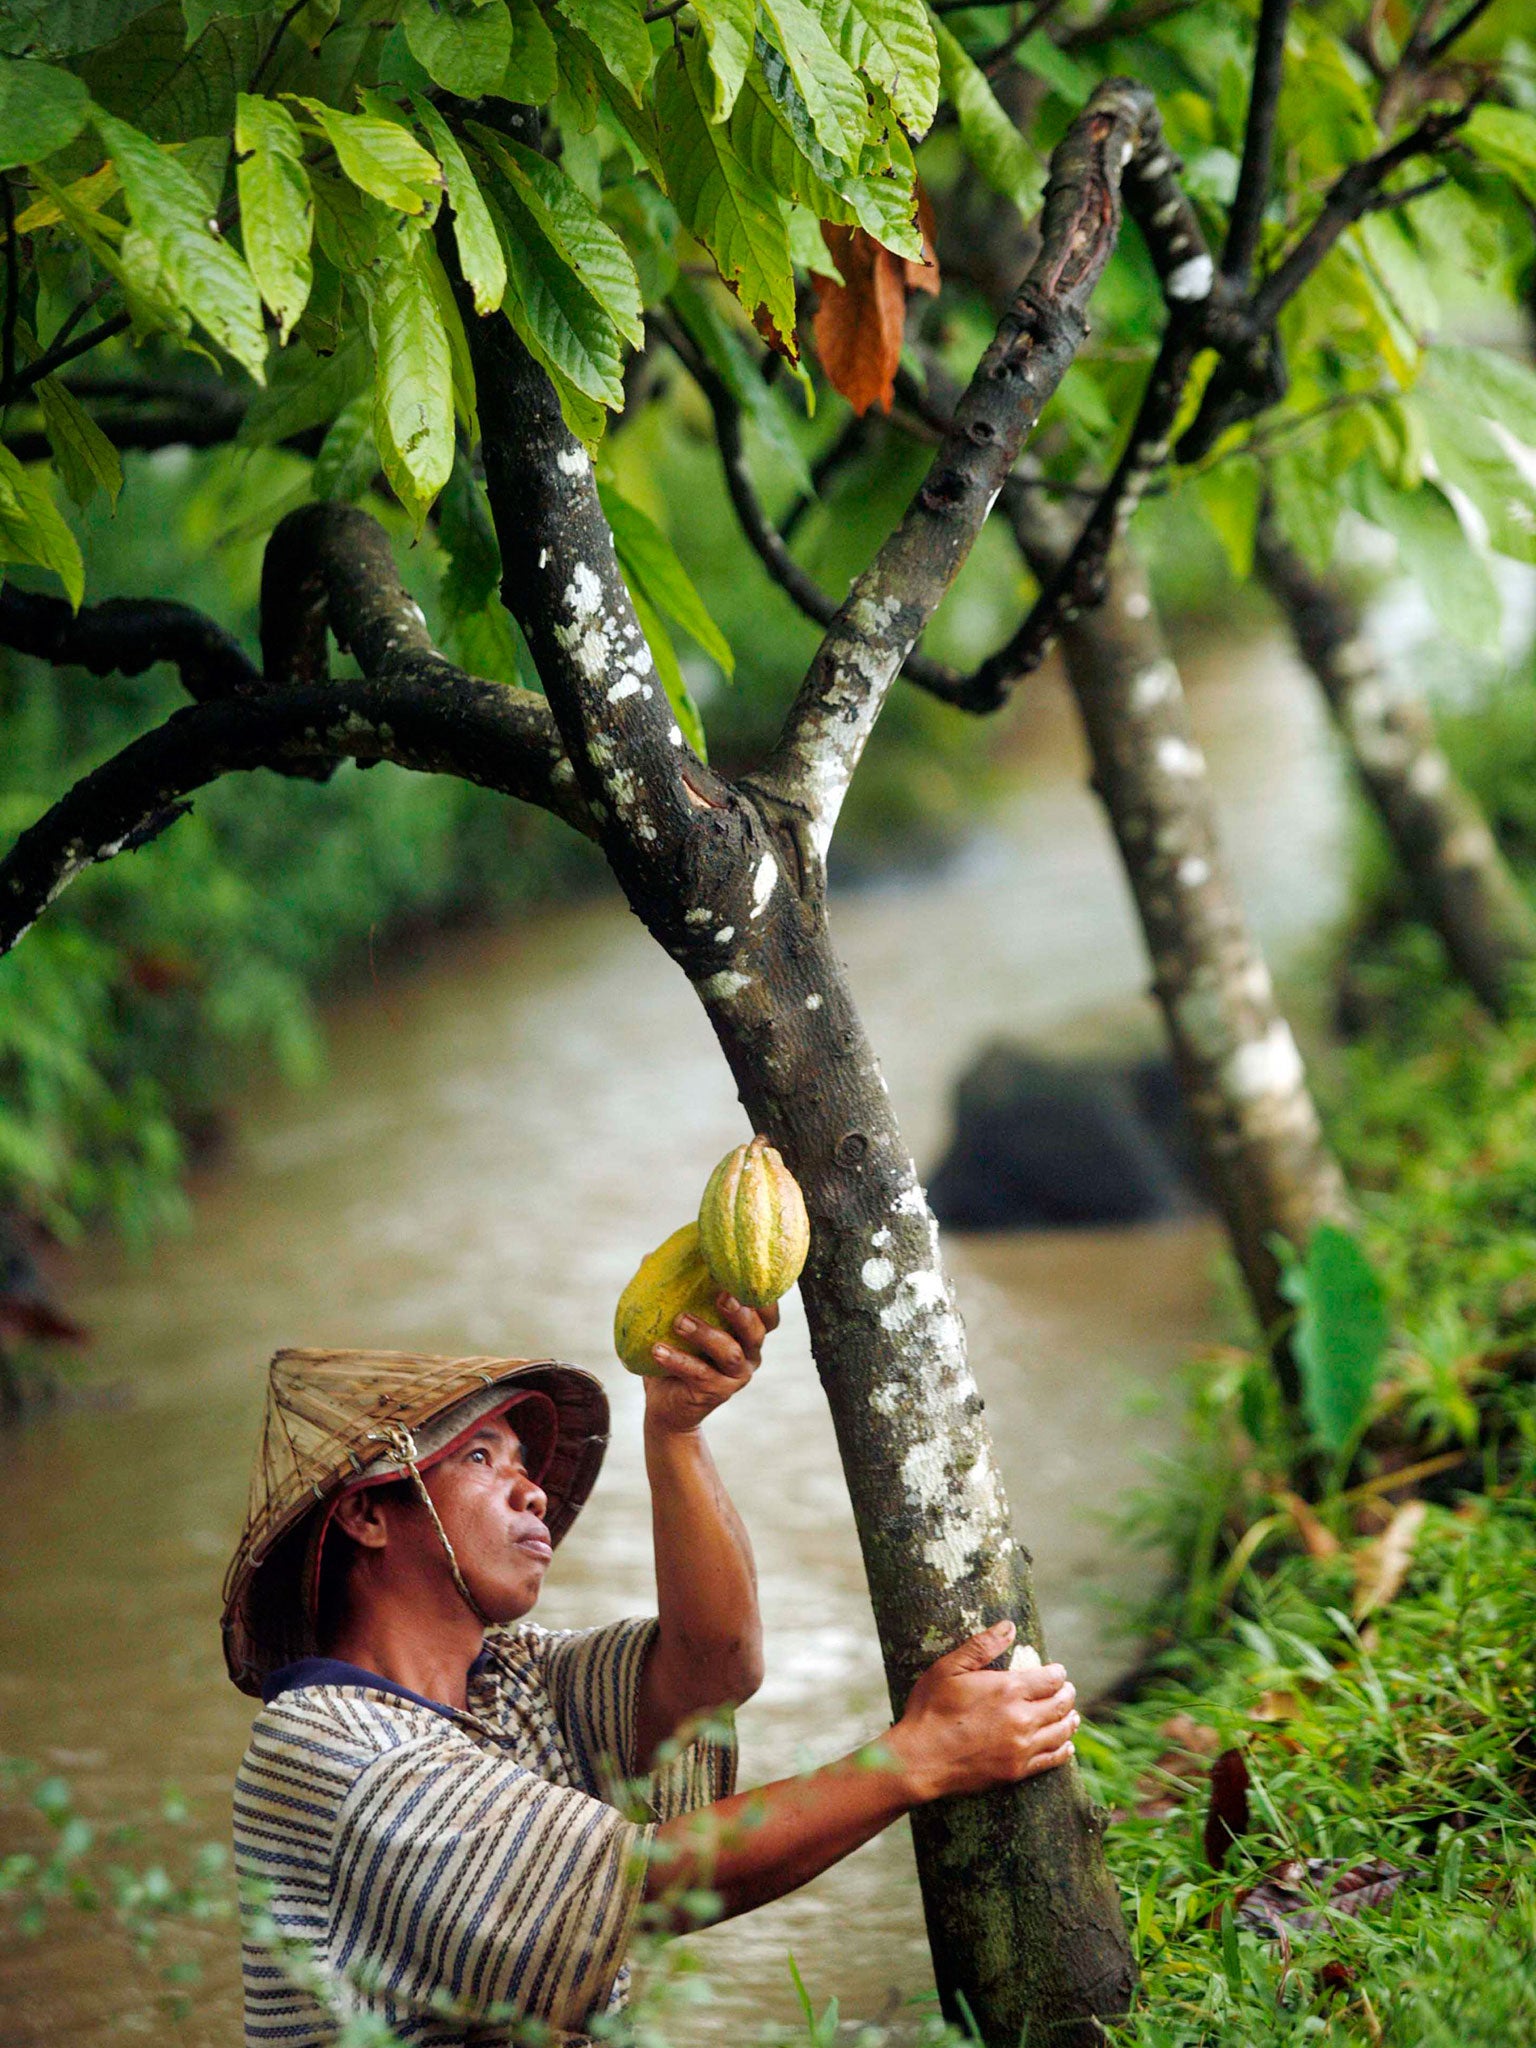 Cocoa beans, harvested in Indonesia, contain flavanols which the scientists used in their memory research